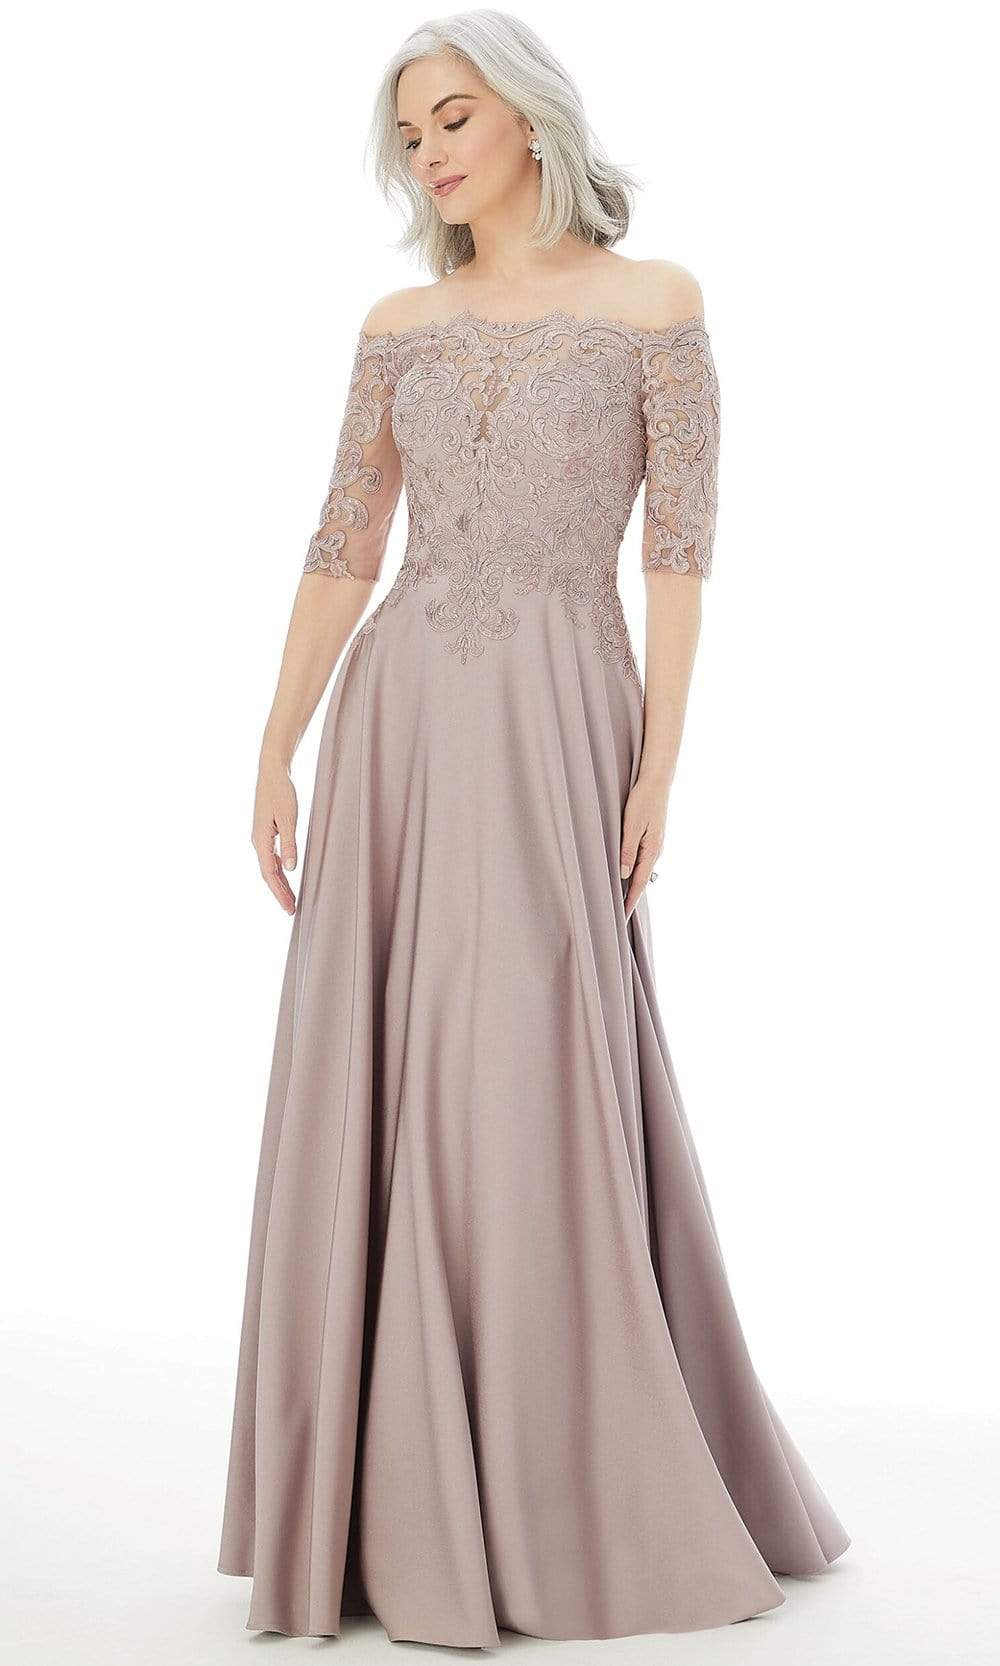 MGNY By Mori Lee - 72220 Off Shoulder Embroidered Lace Crepe Gown Mother of the Bride Dresses